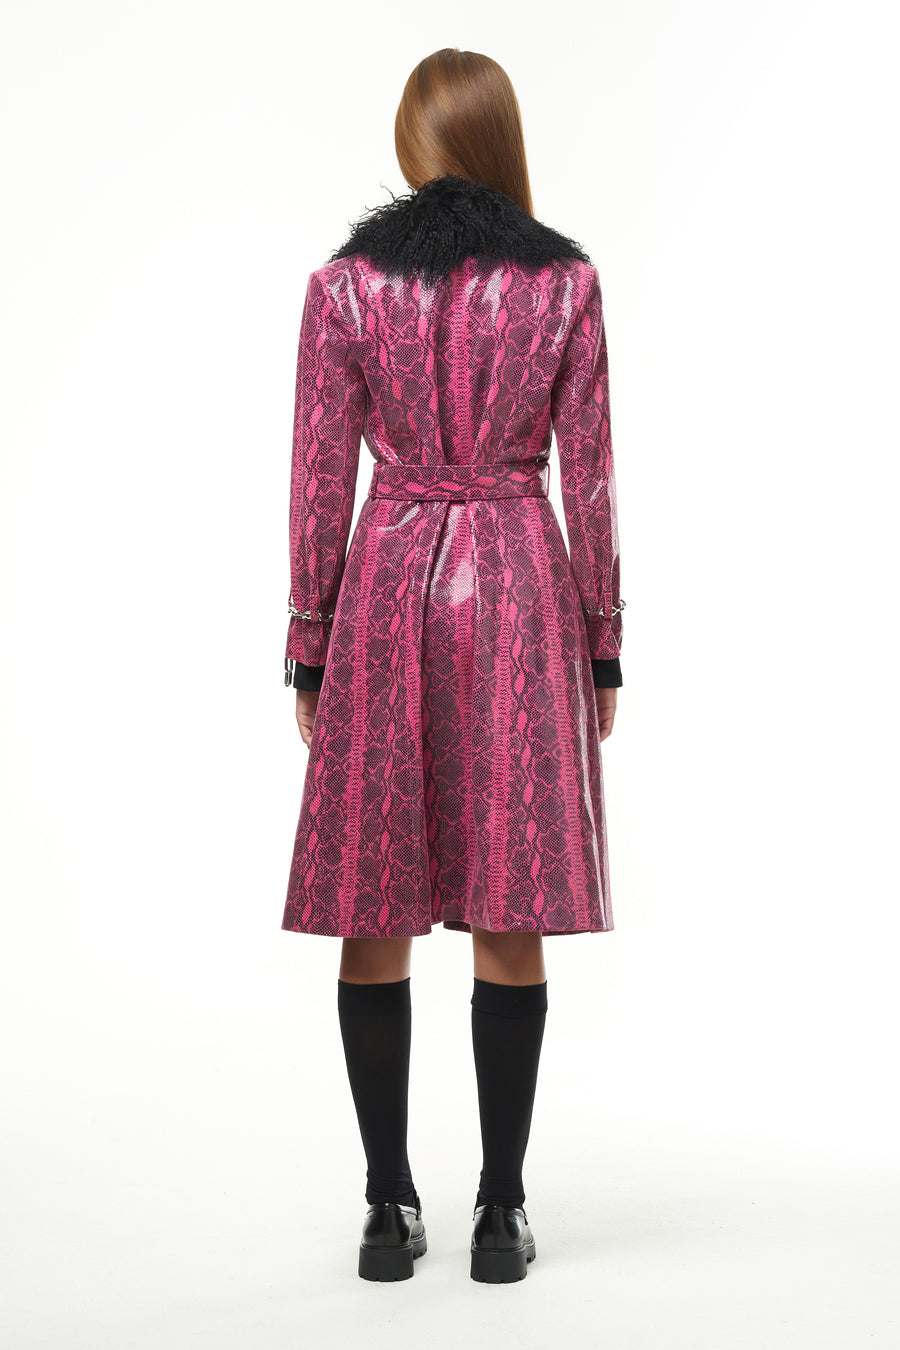 THE BARBIE PINK SNAKESKIN LEATHER TRENCH COAT